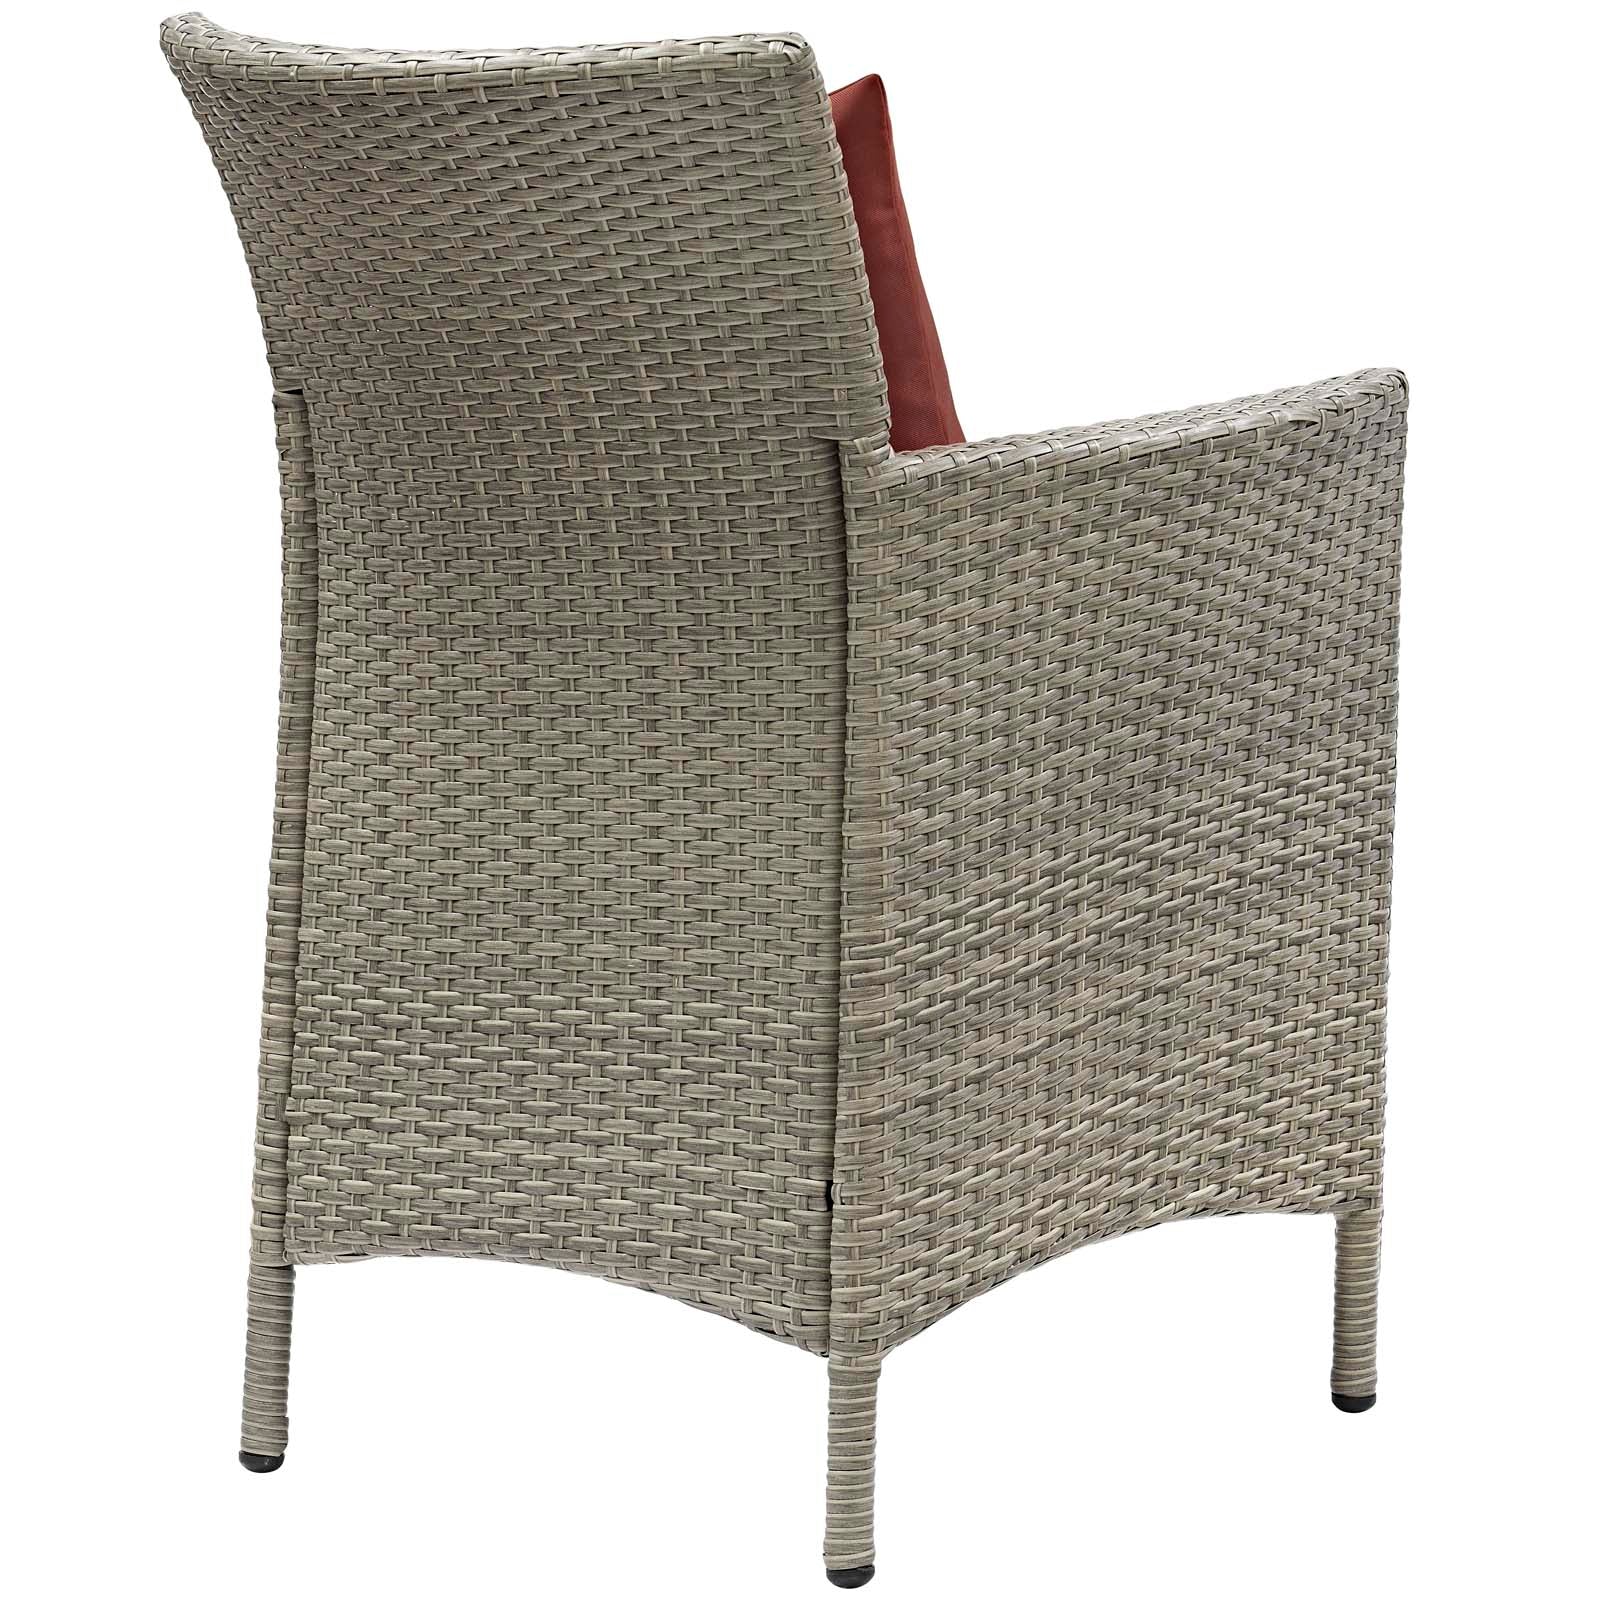 Modway Outdoor Dining Chairs - Conduit Outdoor Patio Wicker Rattan Dining Armchair Light Gray Currant